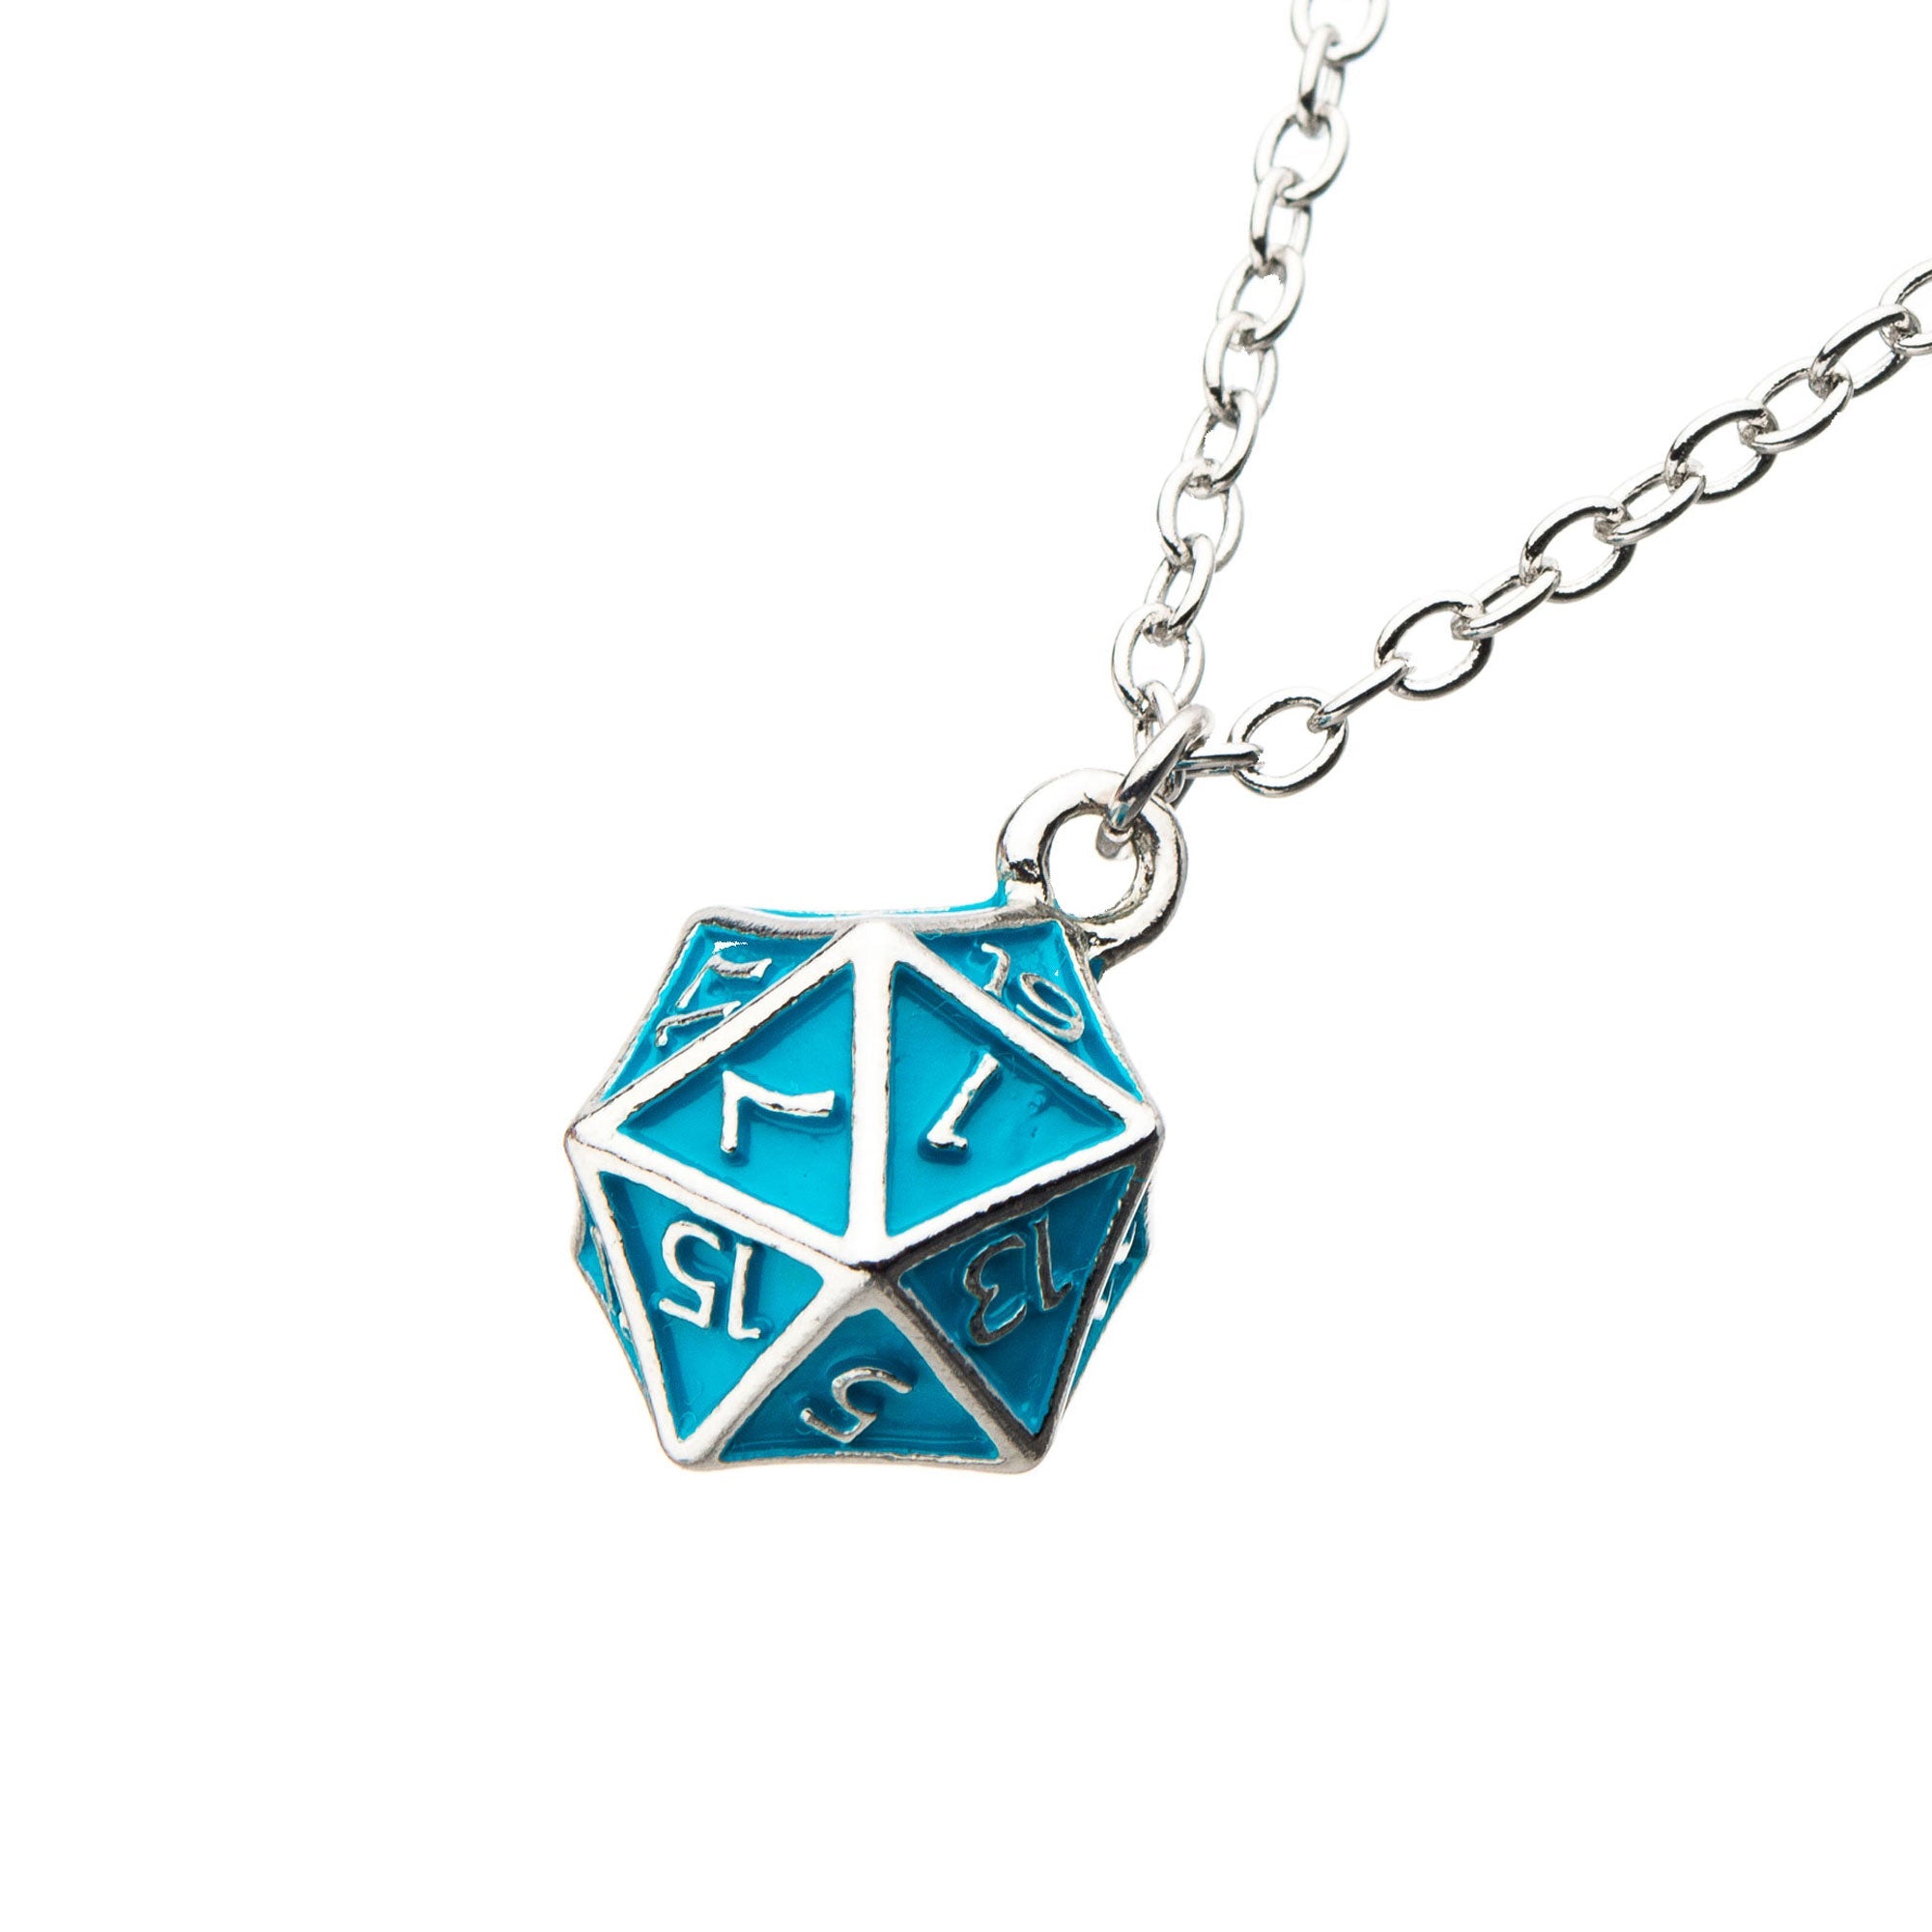 Stainless Steel Geometric Dice Necklace D20 Necklace Polyhedral Dice Charm Necklace Dice Jewelry Dungeons and Dragons Necklace, Women's, Size: One